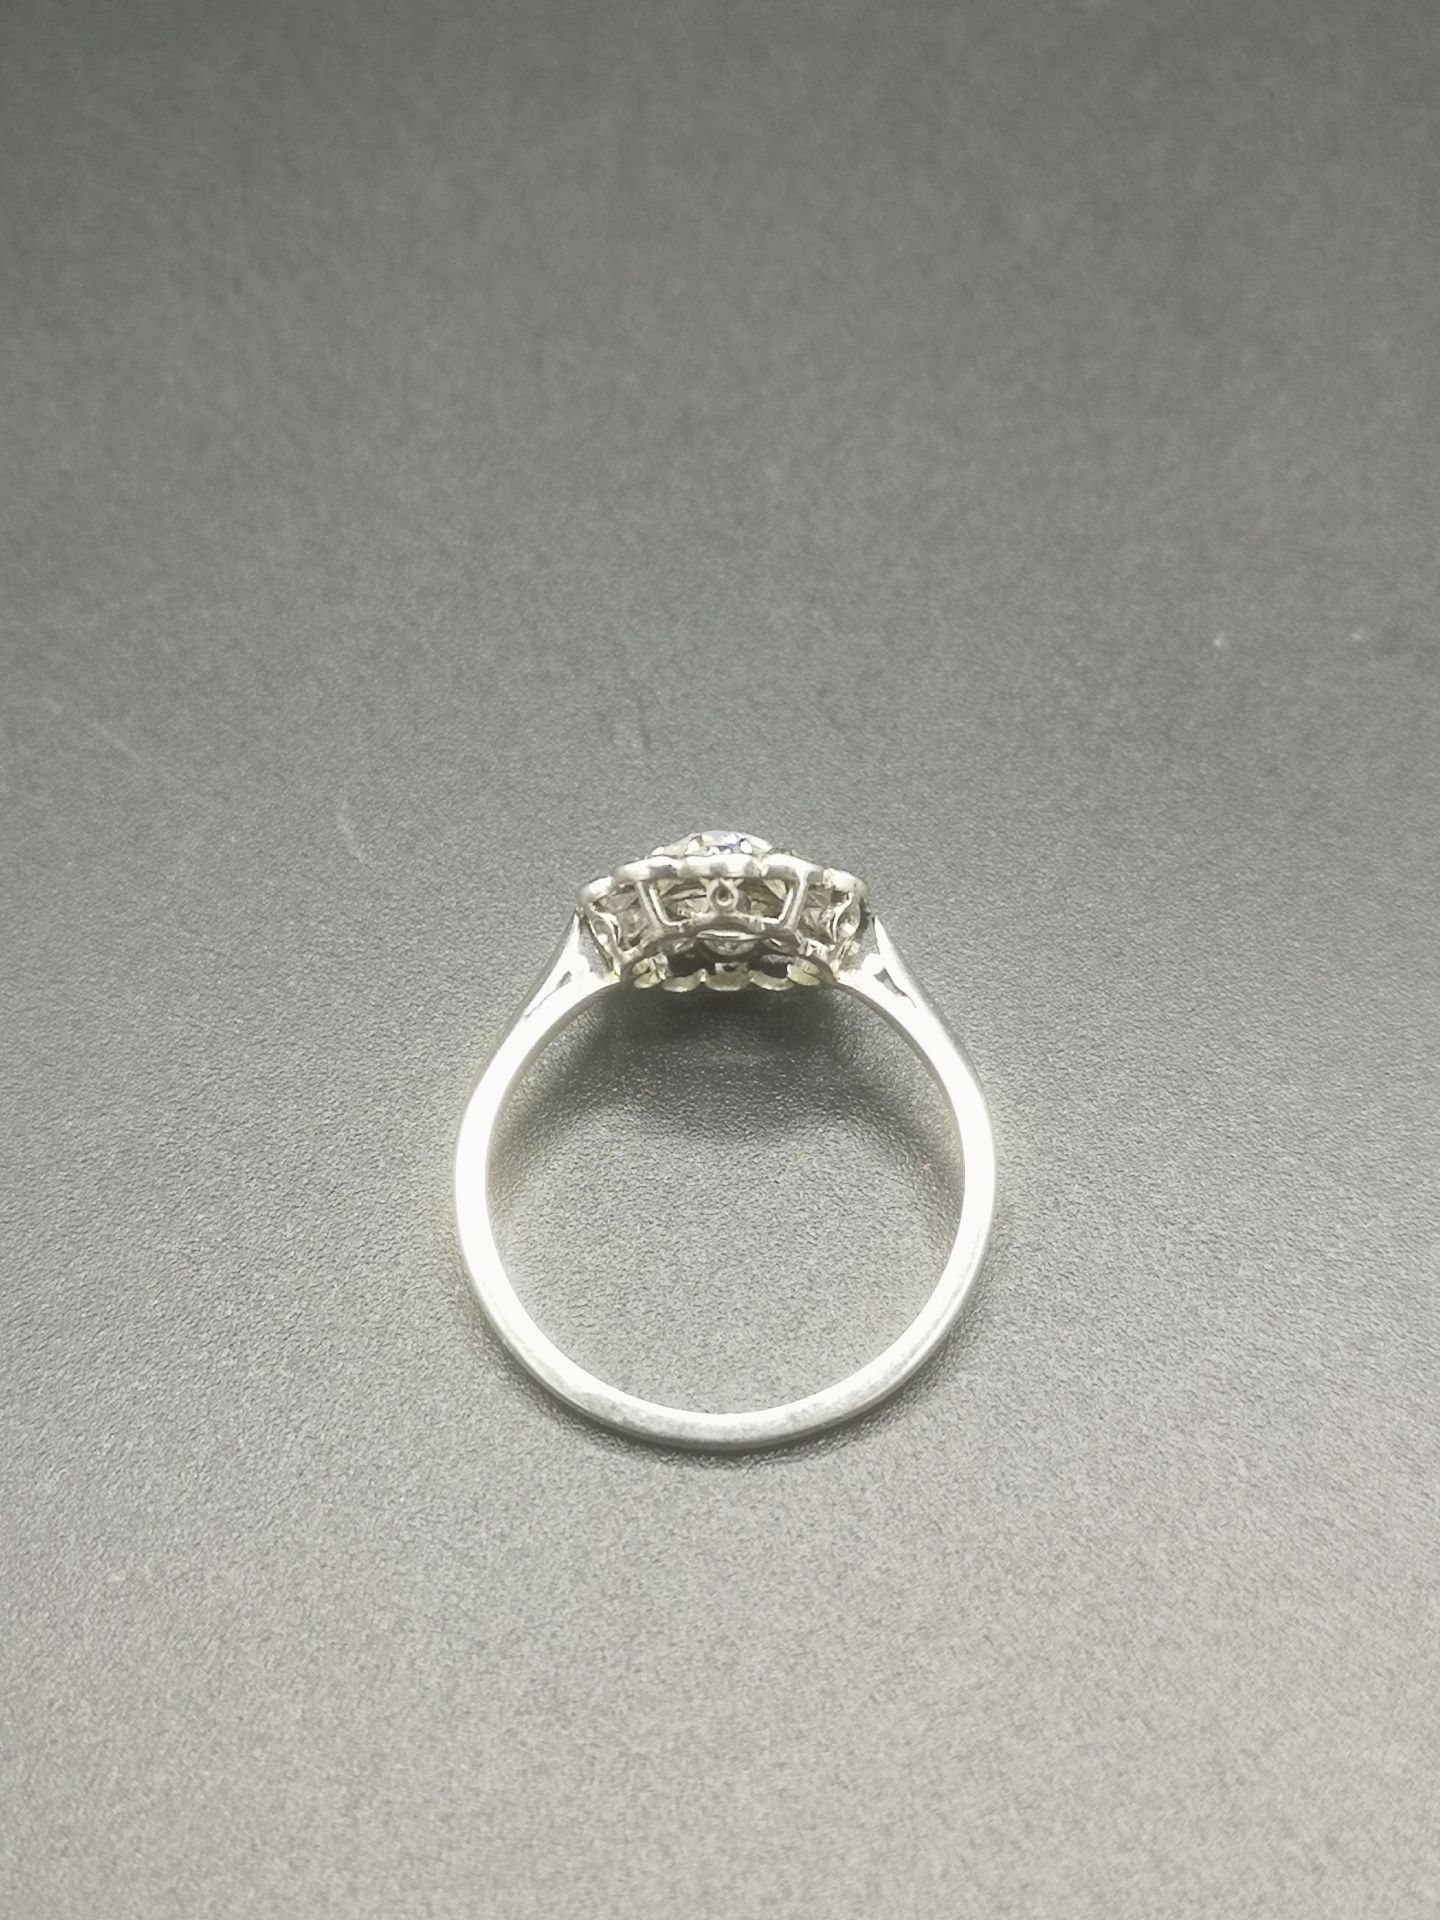 White metal and diamond cluster ring - Image 4 of 4